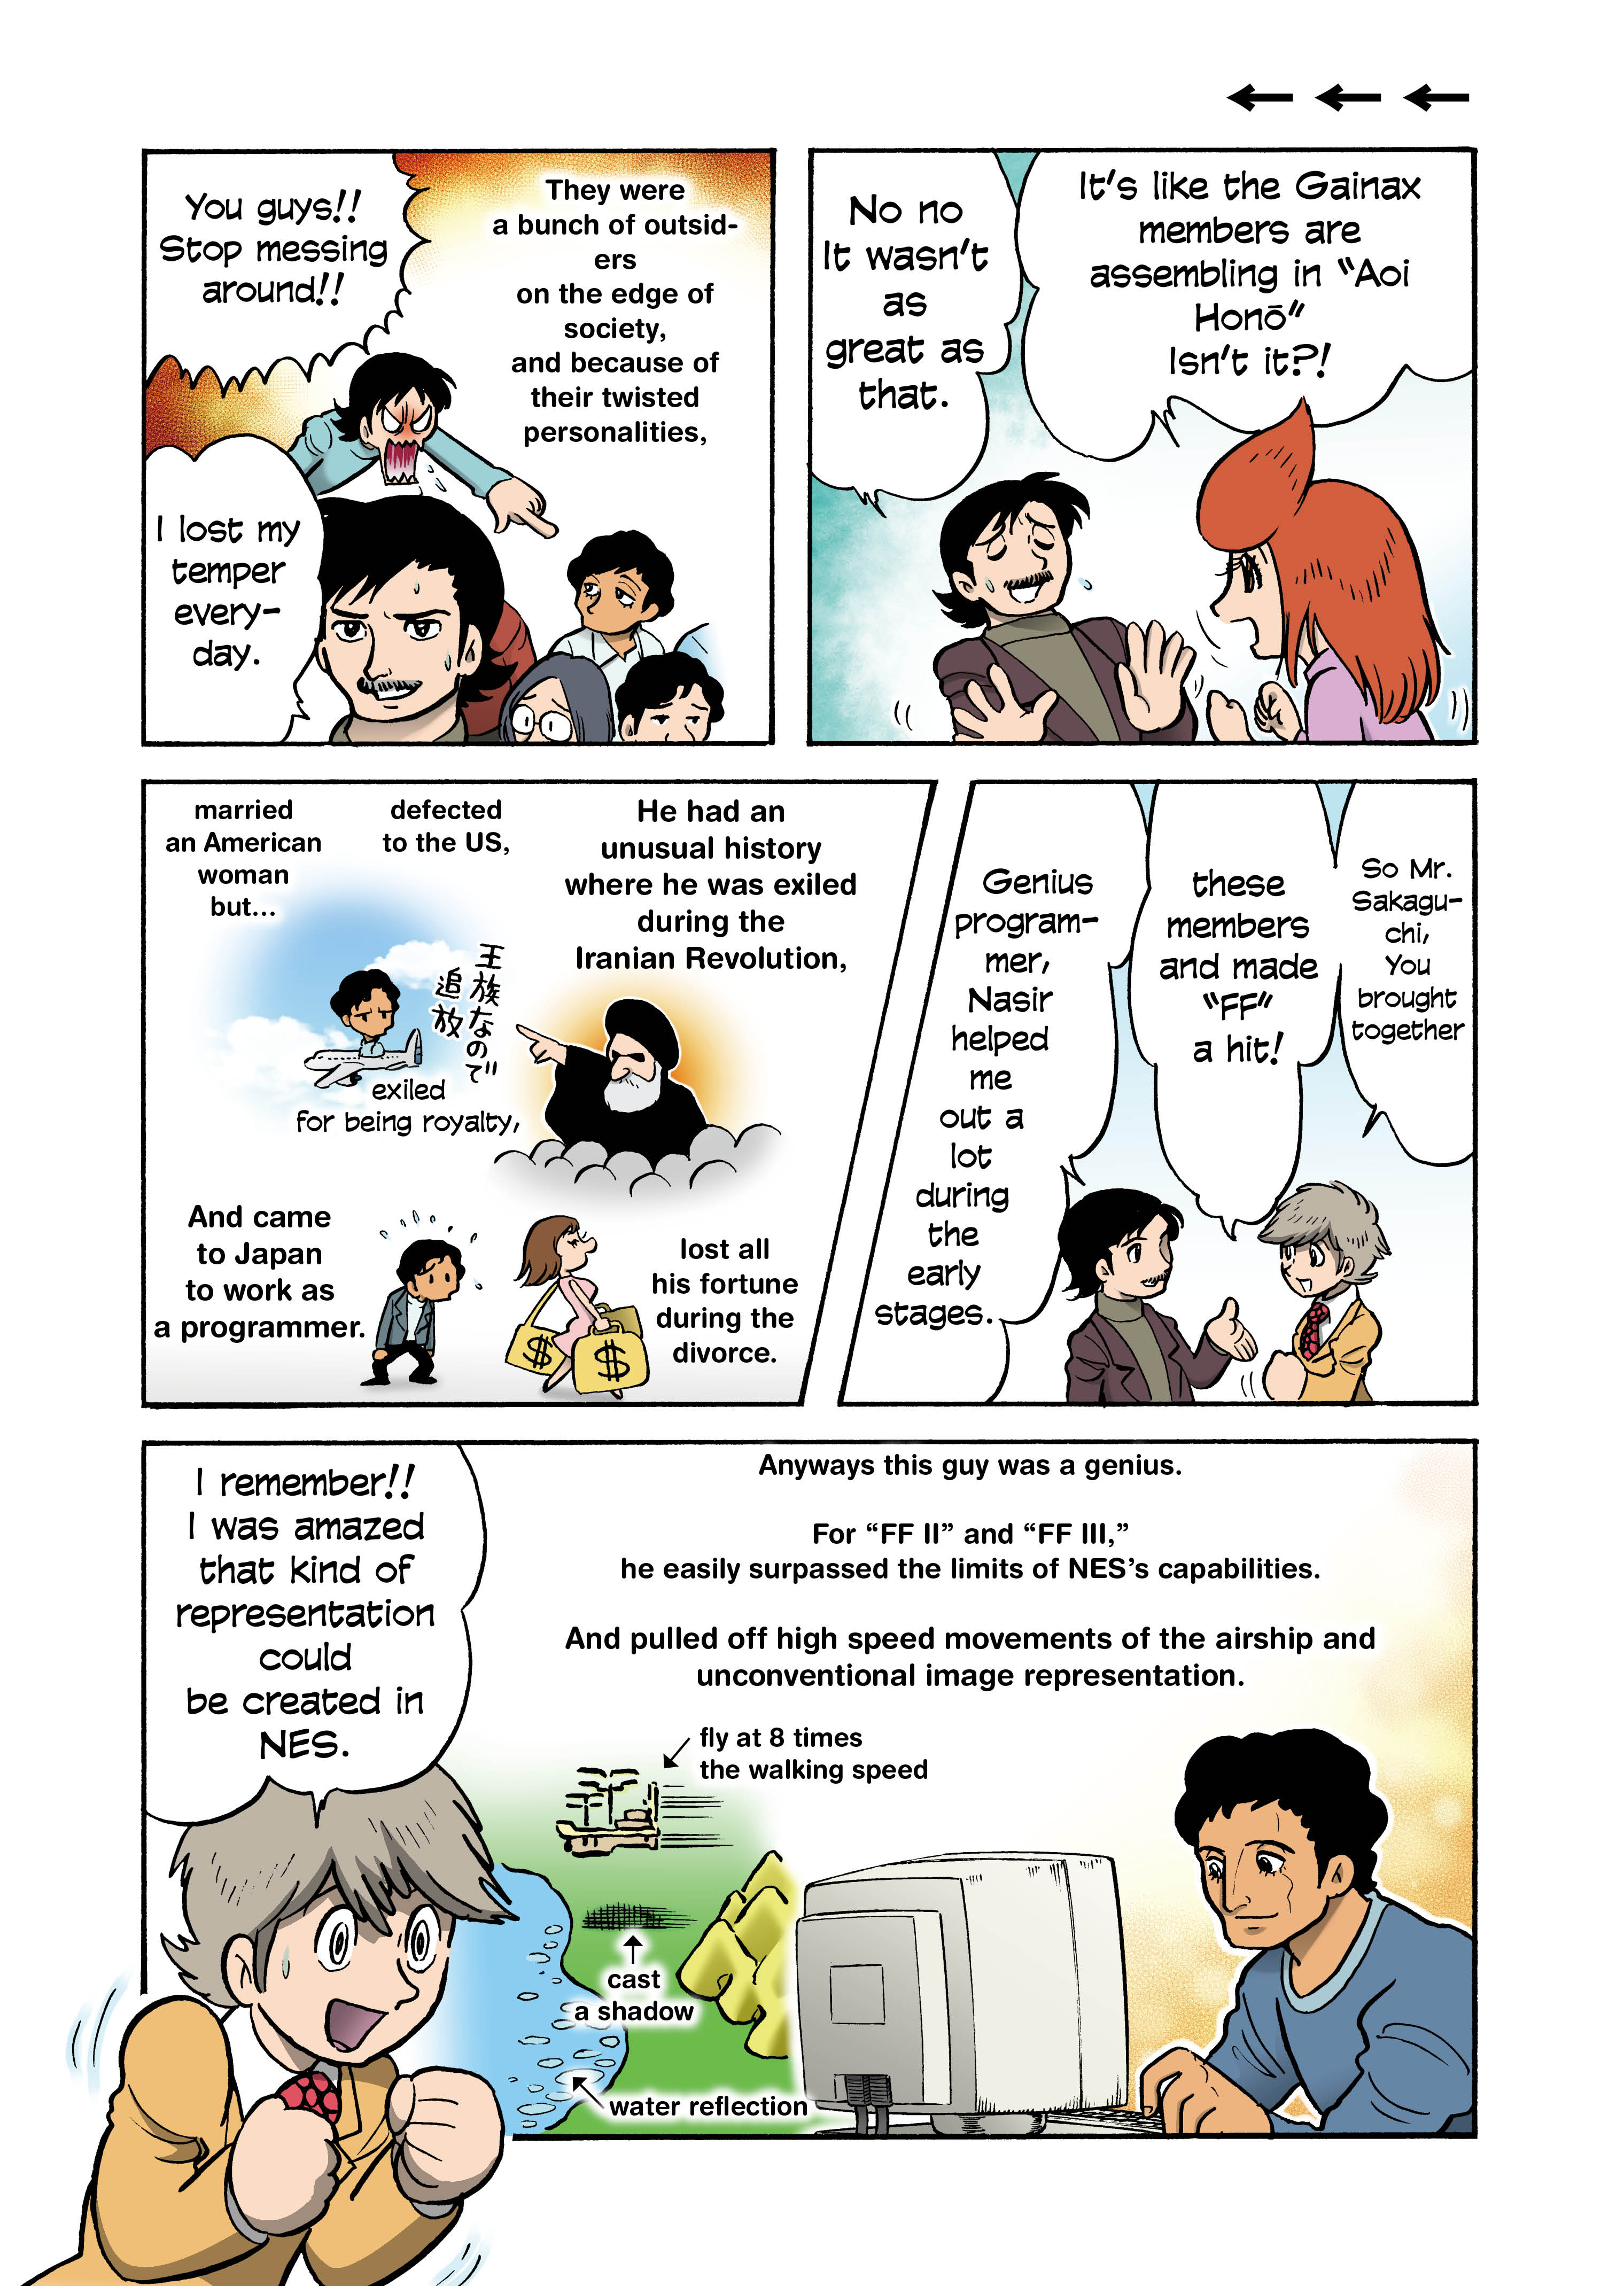 【New Comic Series】Hironobu Sakaguchi and FF programmers’ try to rival DQ [Game Designers in their ‘early’ days]_009